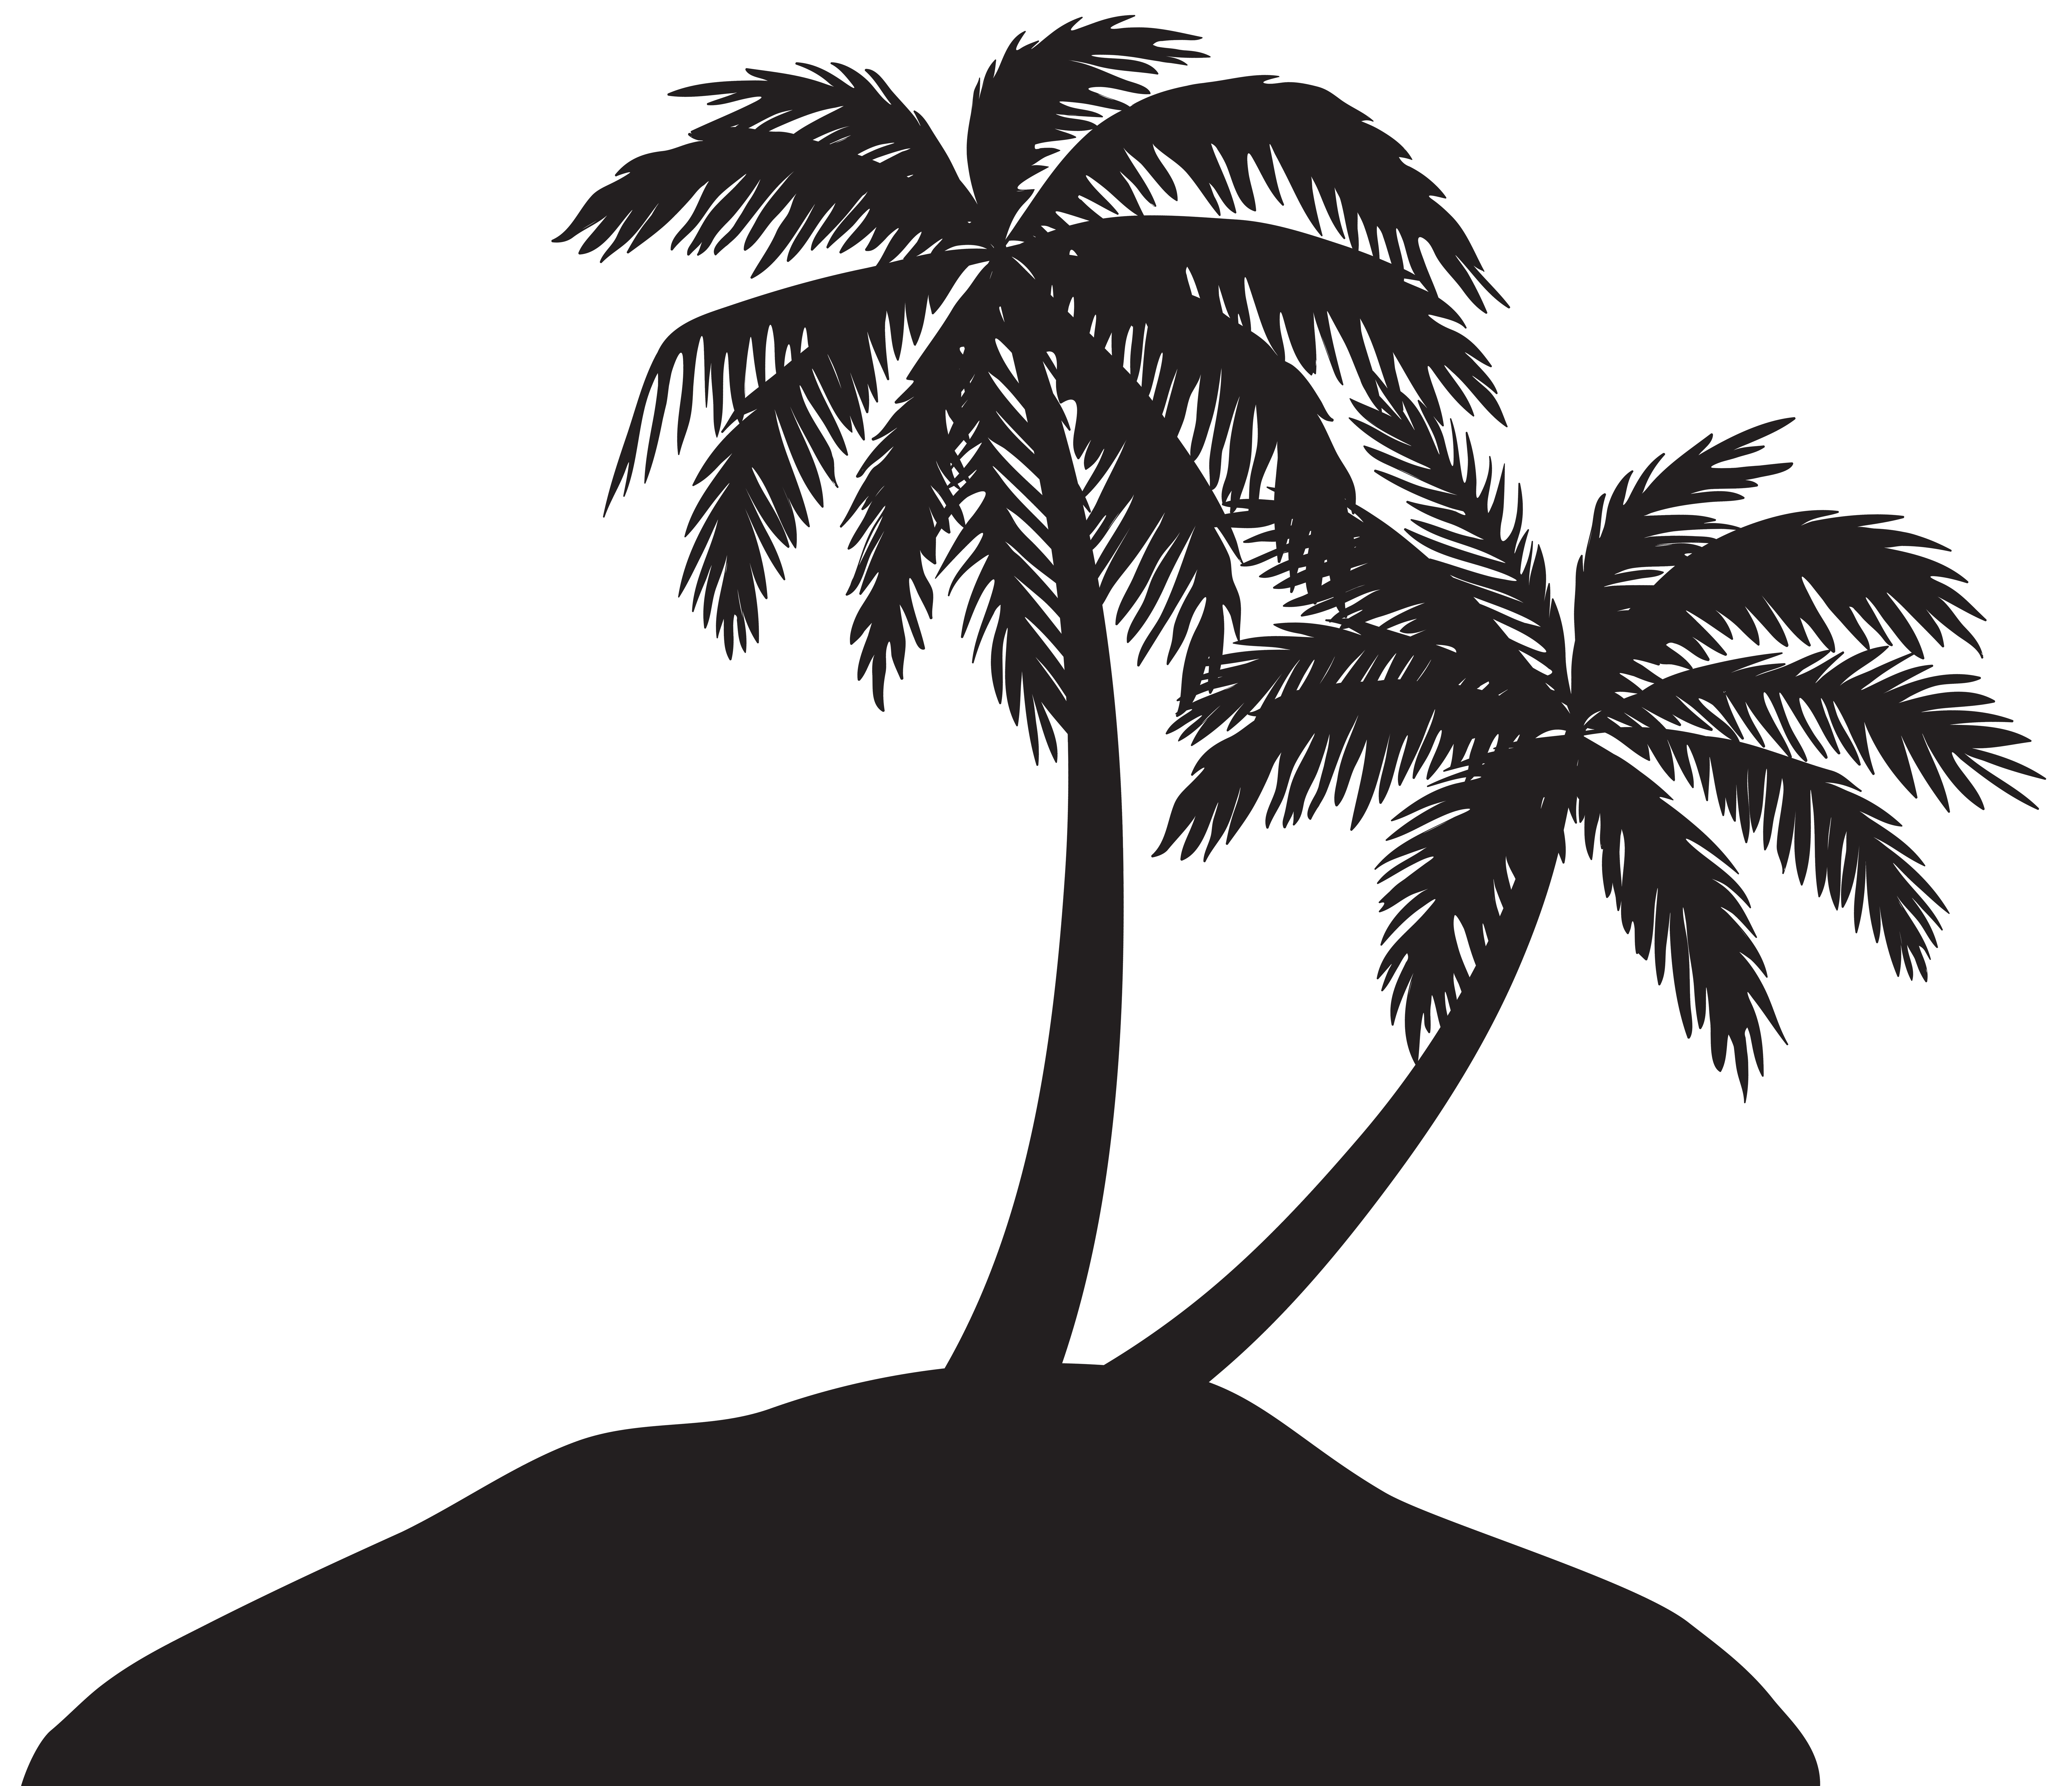 Island with Palm Trees Silhouette PNG Clip Art Image | Gallery ...